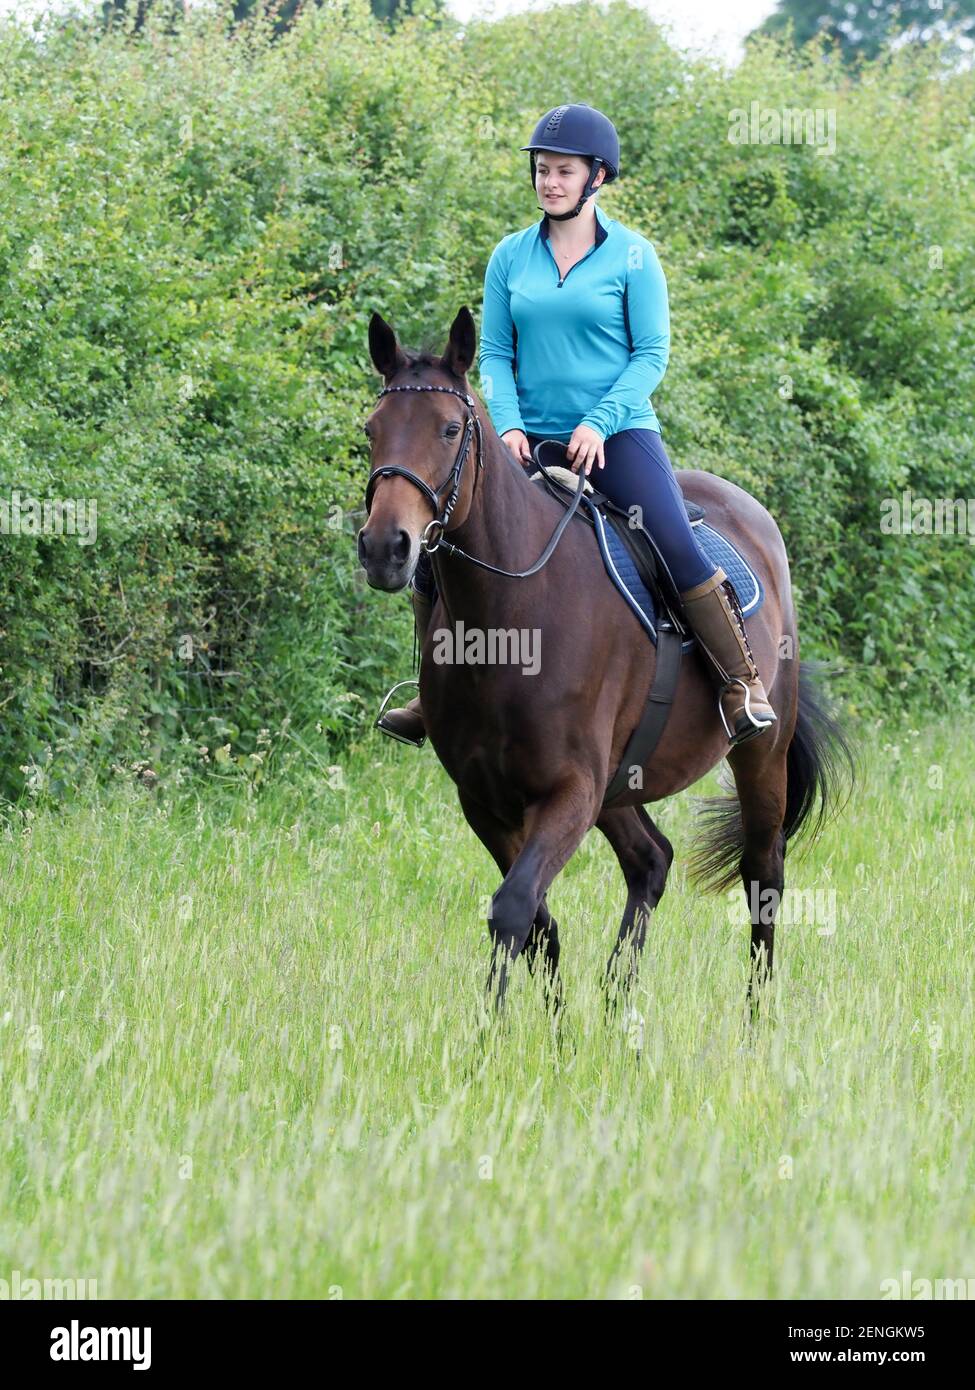 A lady hacks her bay horse through a grass meadow. Stock Photo